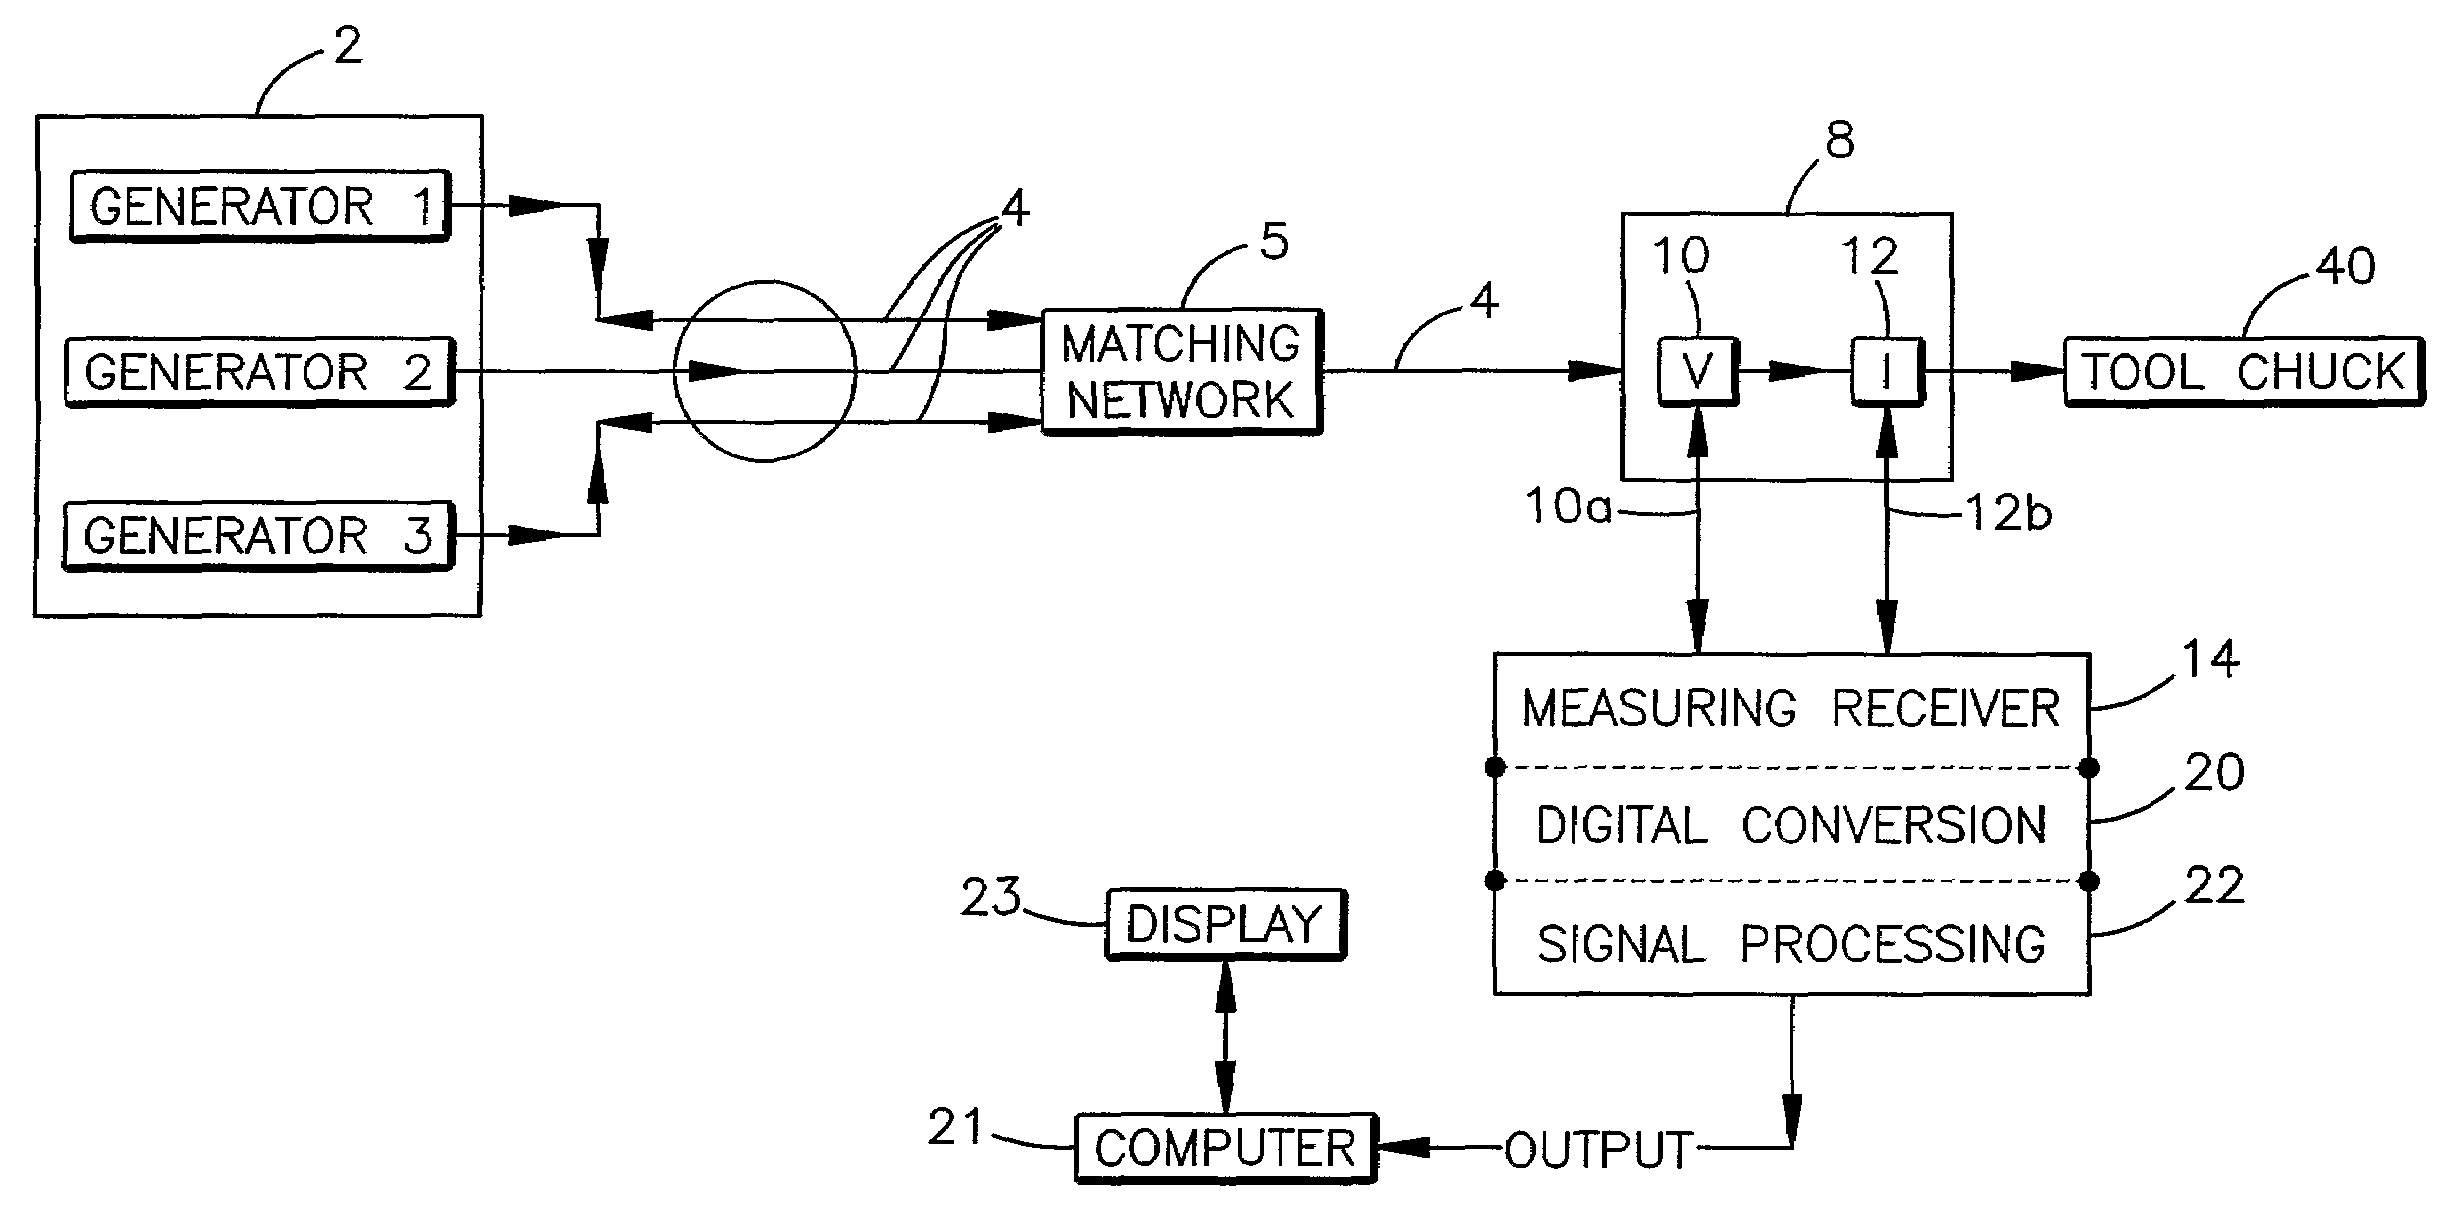 System and method for analyzing power flow in semiconductor plasma generation systems